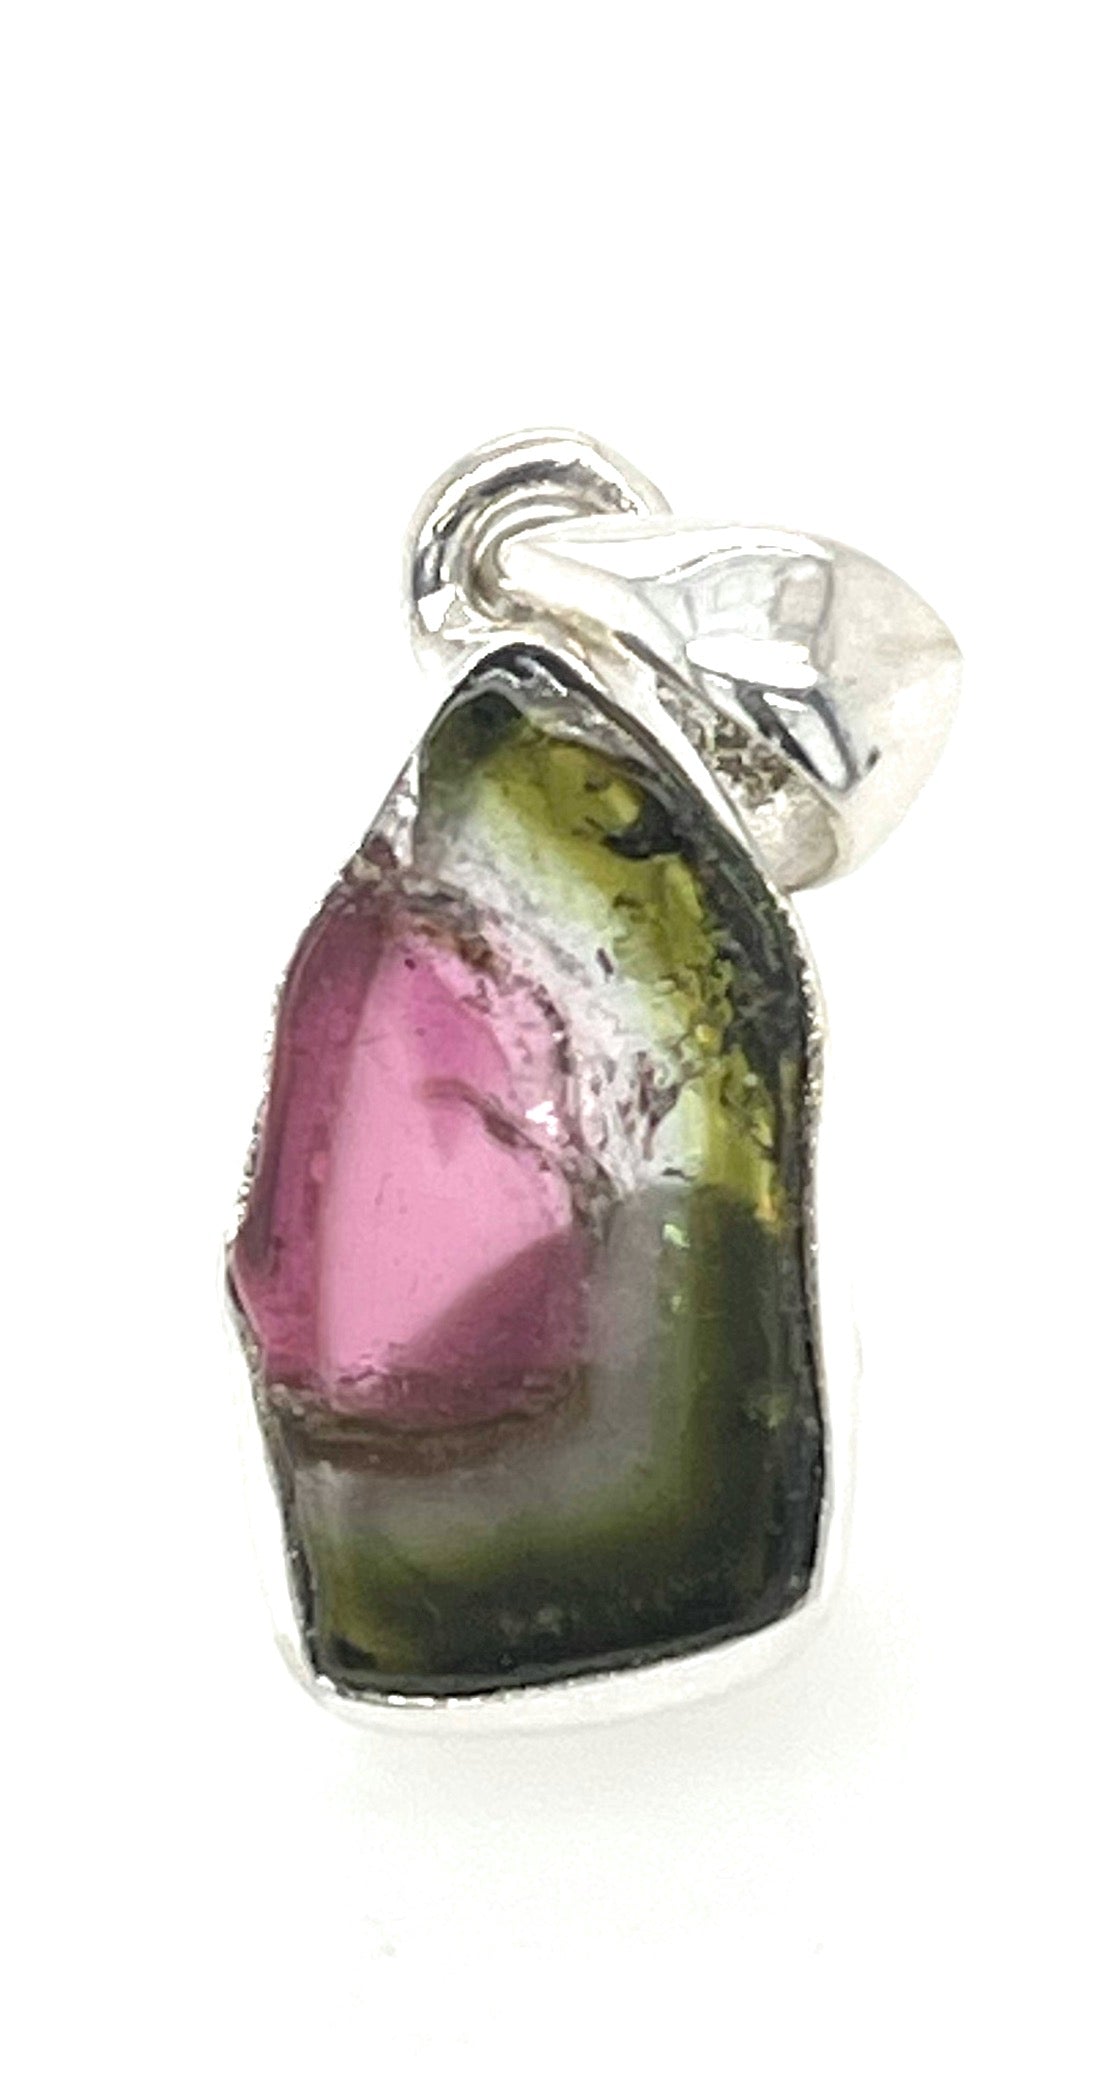 Natural Watermelon Tourmaline 925 Solid Sterling Silver Pendant 20mm - Natural Rocks by Kala